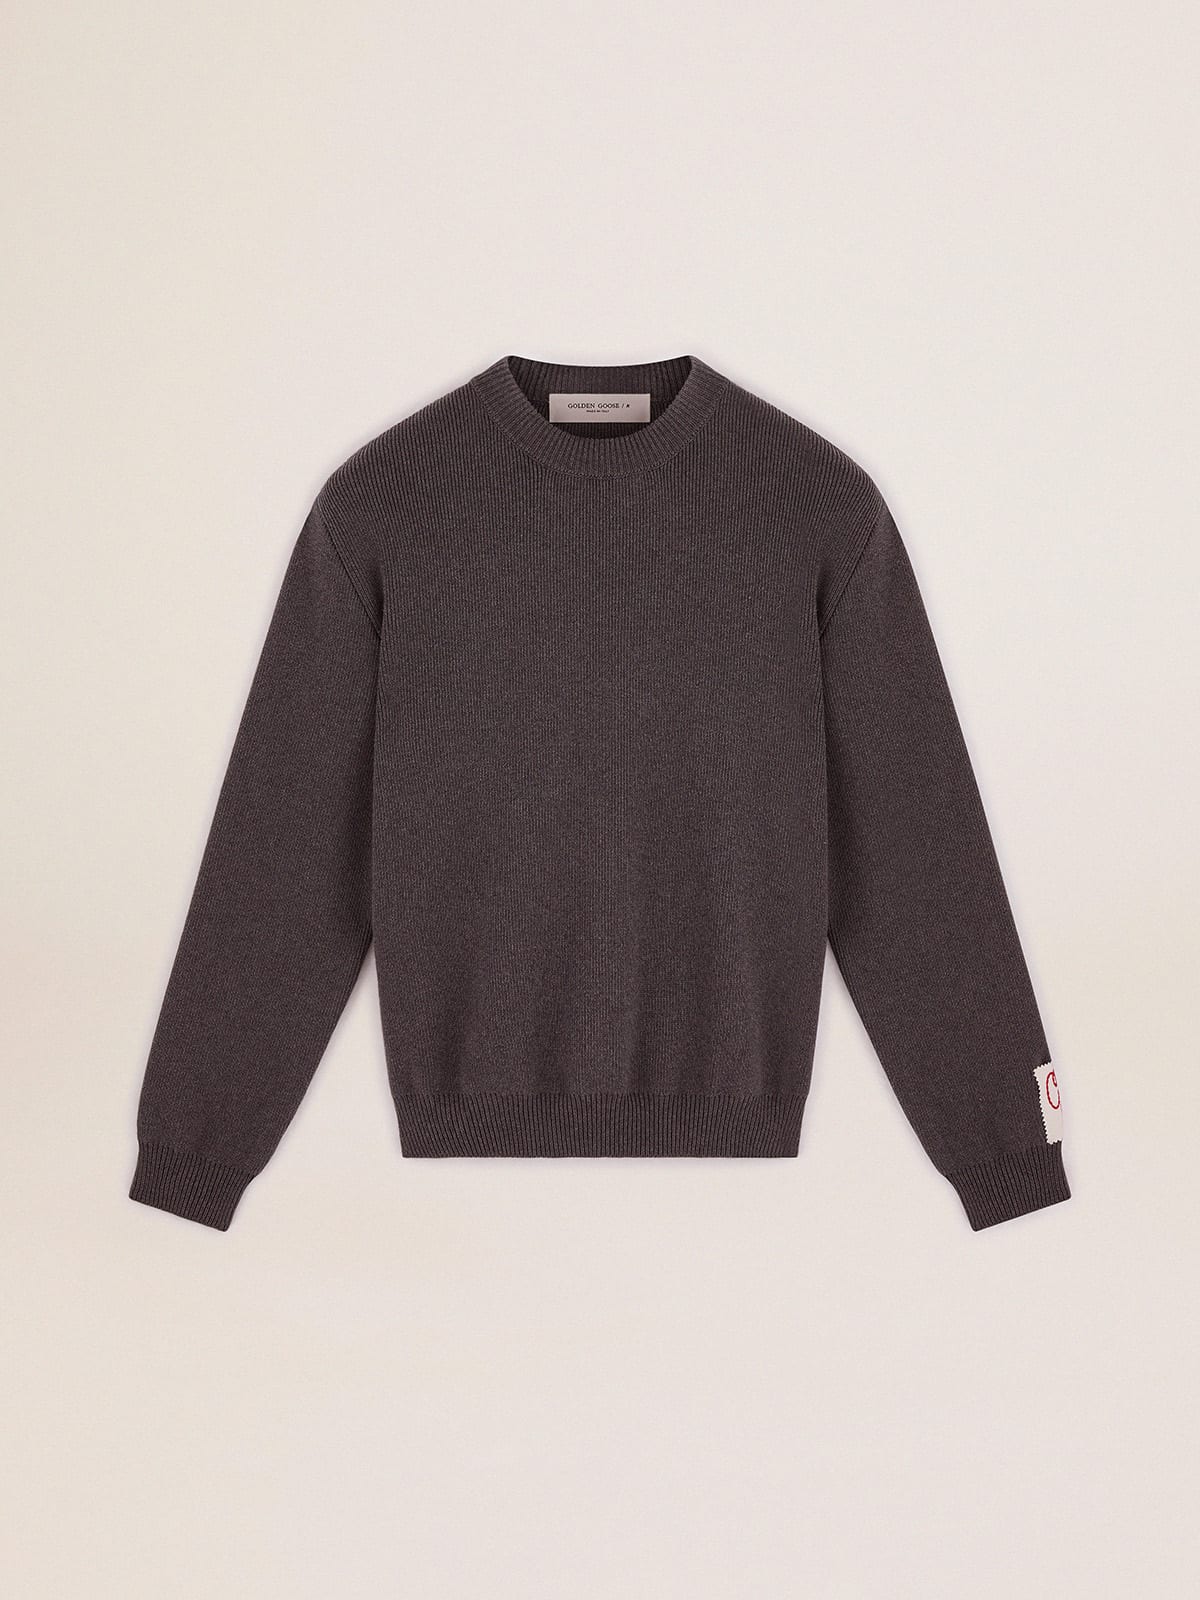 Round-neck sweater in dark gray cotton with logo on the back